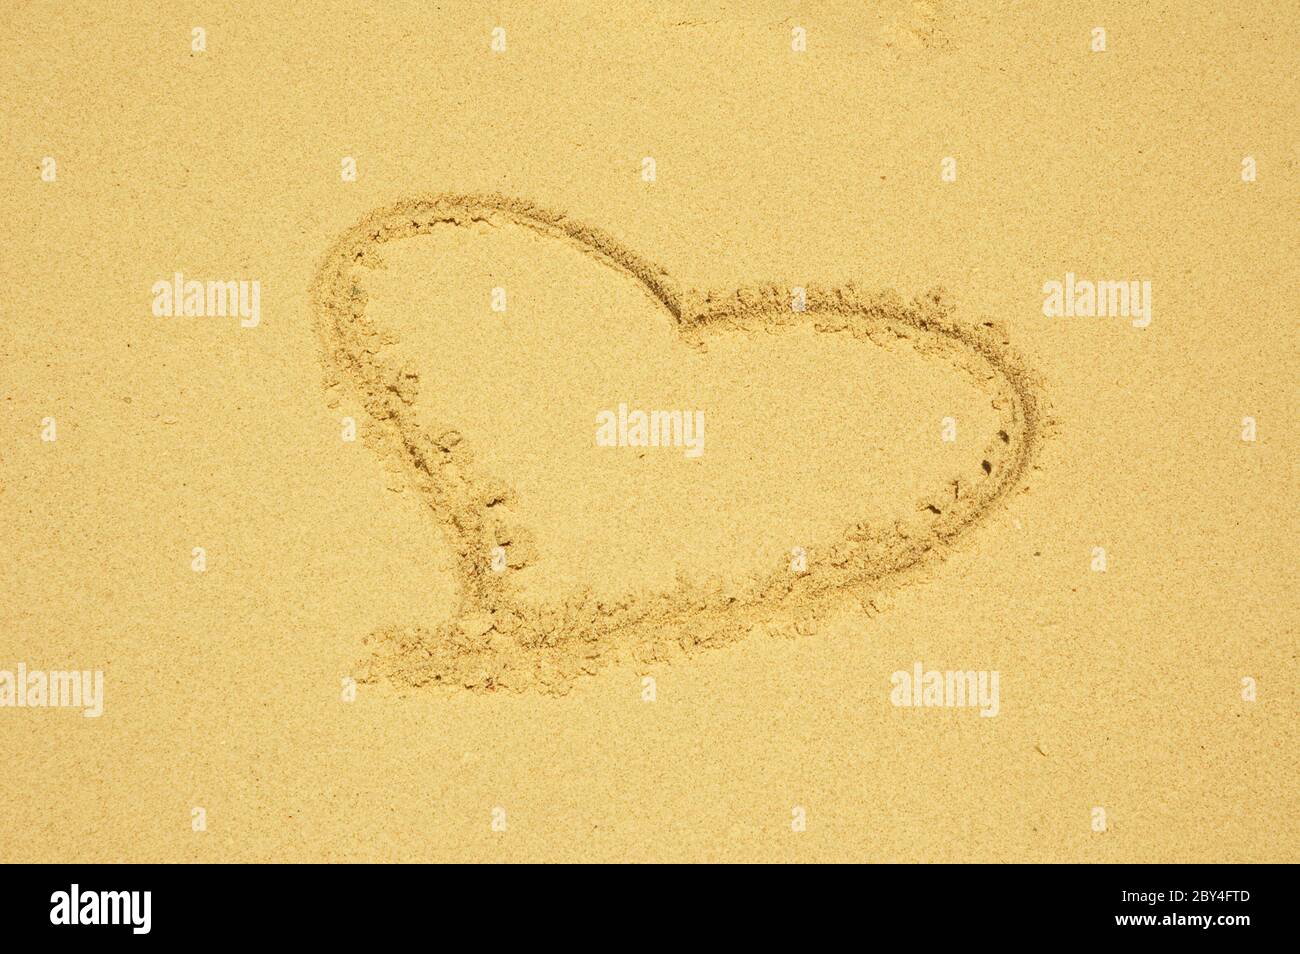 heart drawn in the sand Stock Photo